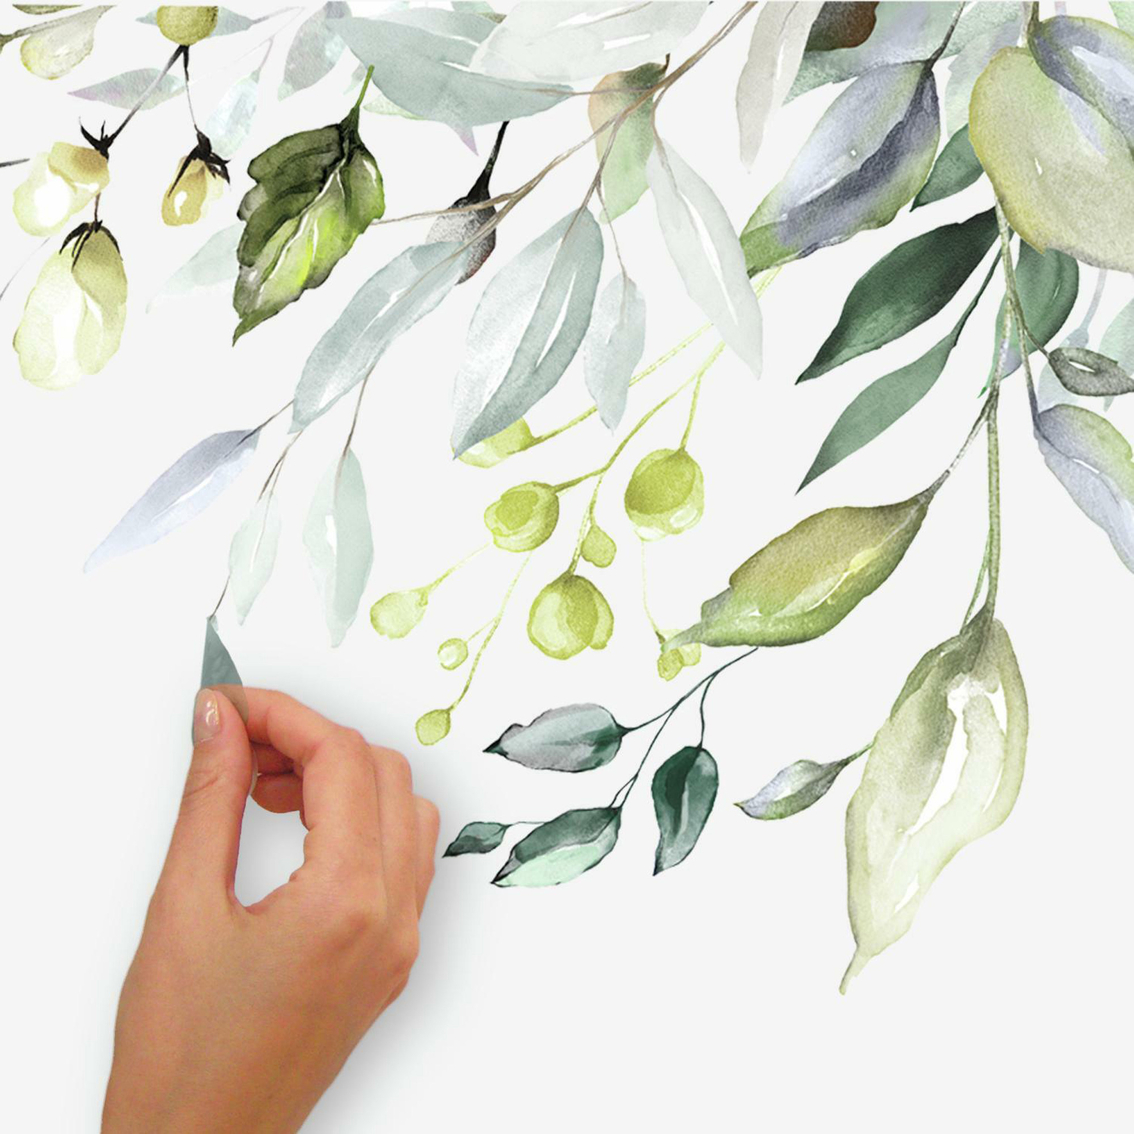 RoomMates Hanging Watercolor Leaves Peel and Stick Giant Wall Decals - Image 5 of 6